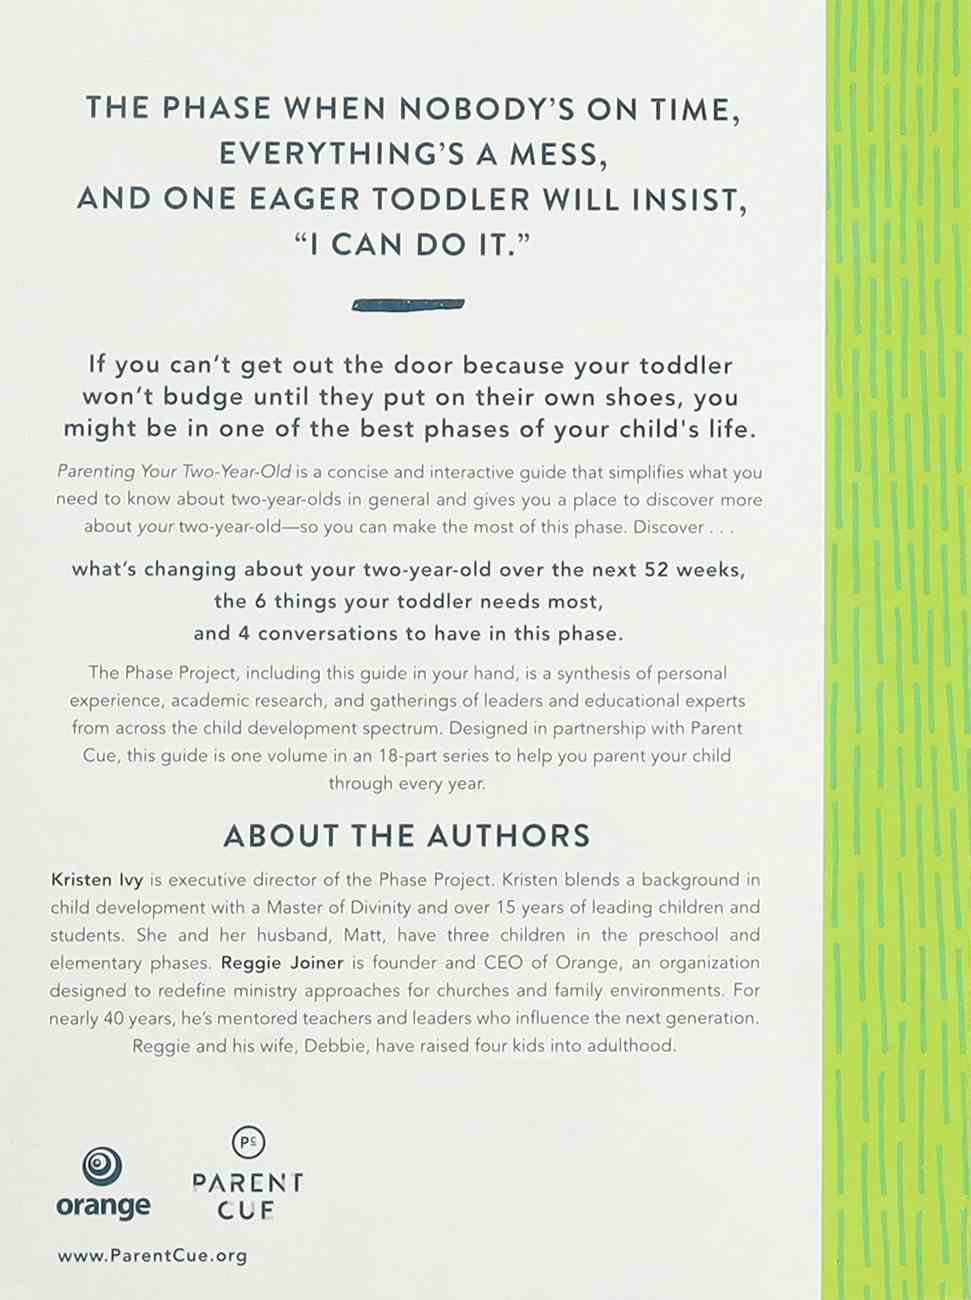 Parenting Your Two Year Old: A Guide to Making the Most of the "I Can Do It" Phase Paperback